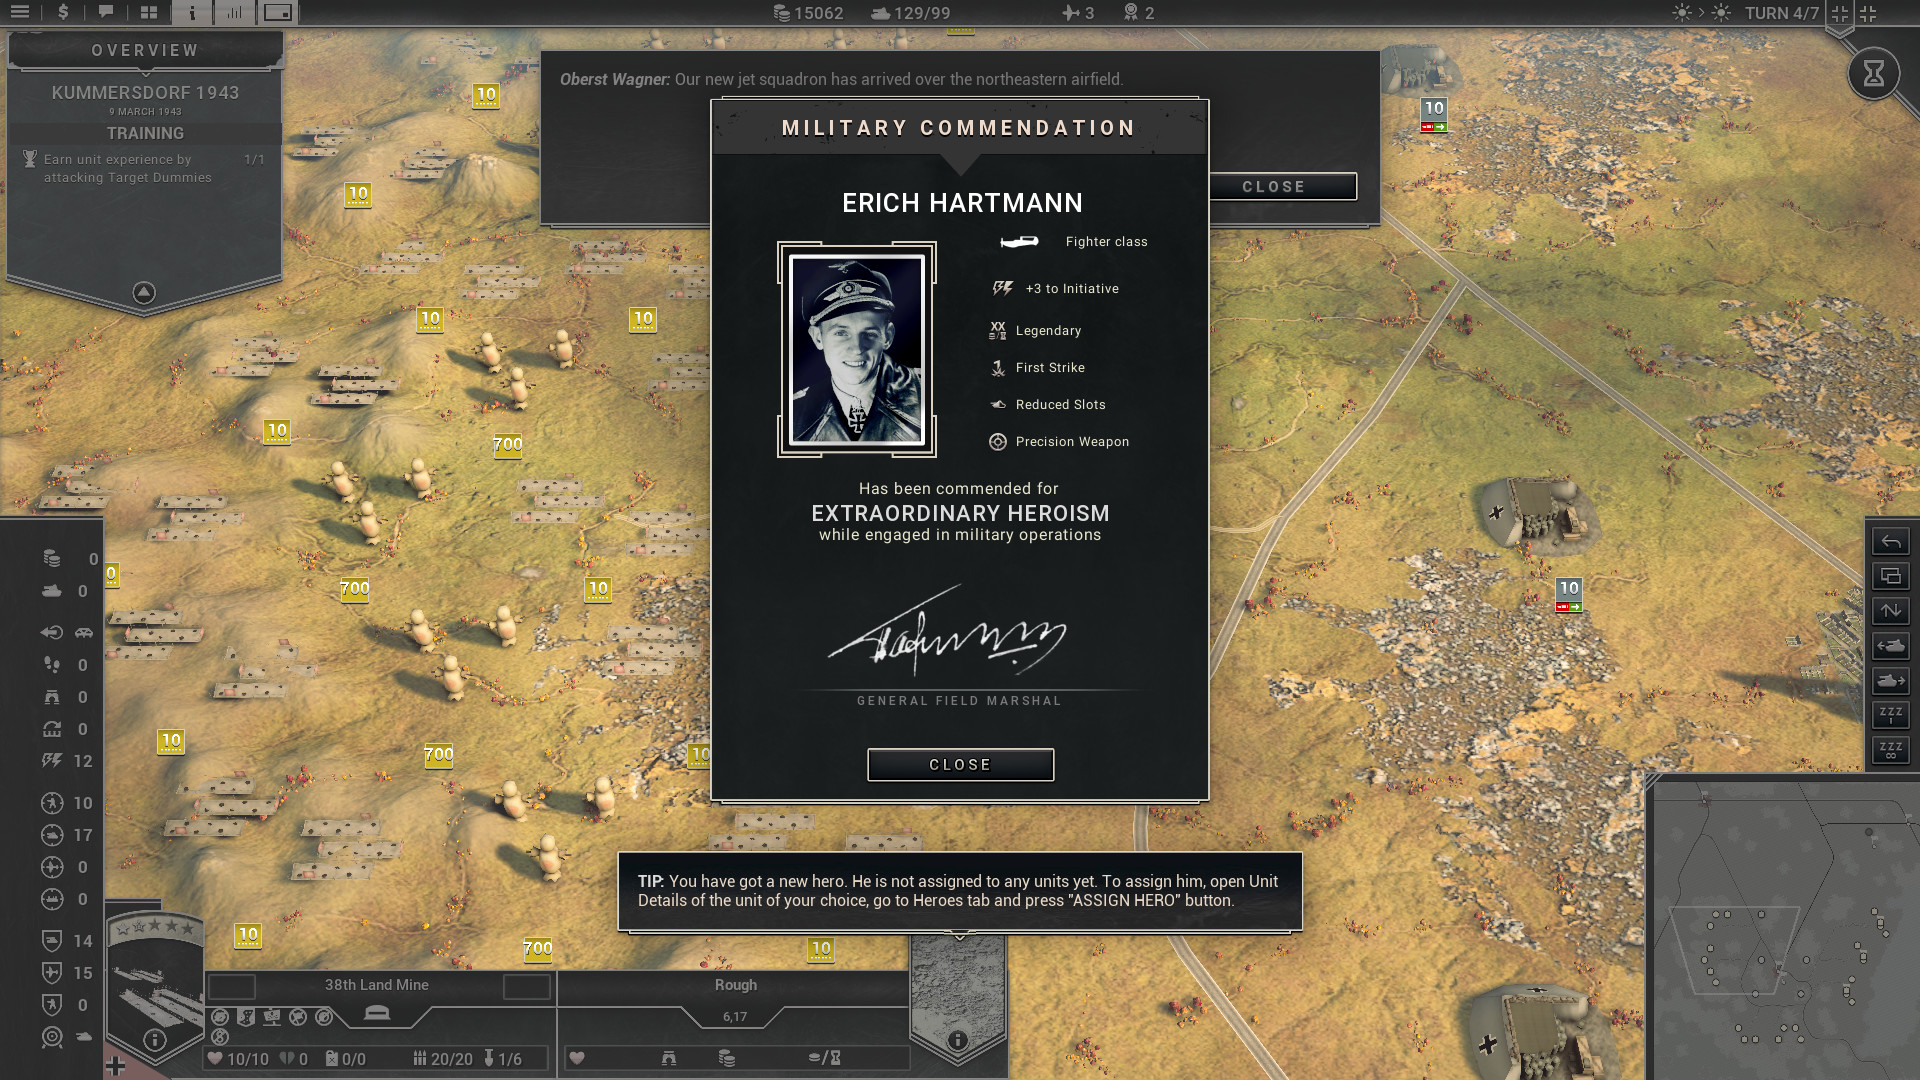 Panzer Corps 2 - Axis Operations 1943 DLC Steam CD Key 7.28 usd